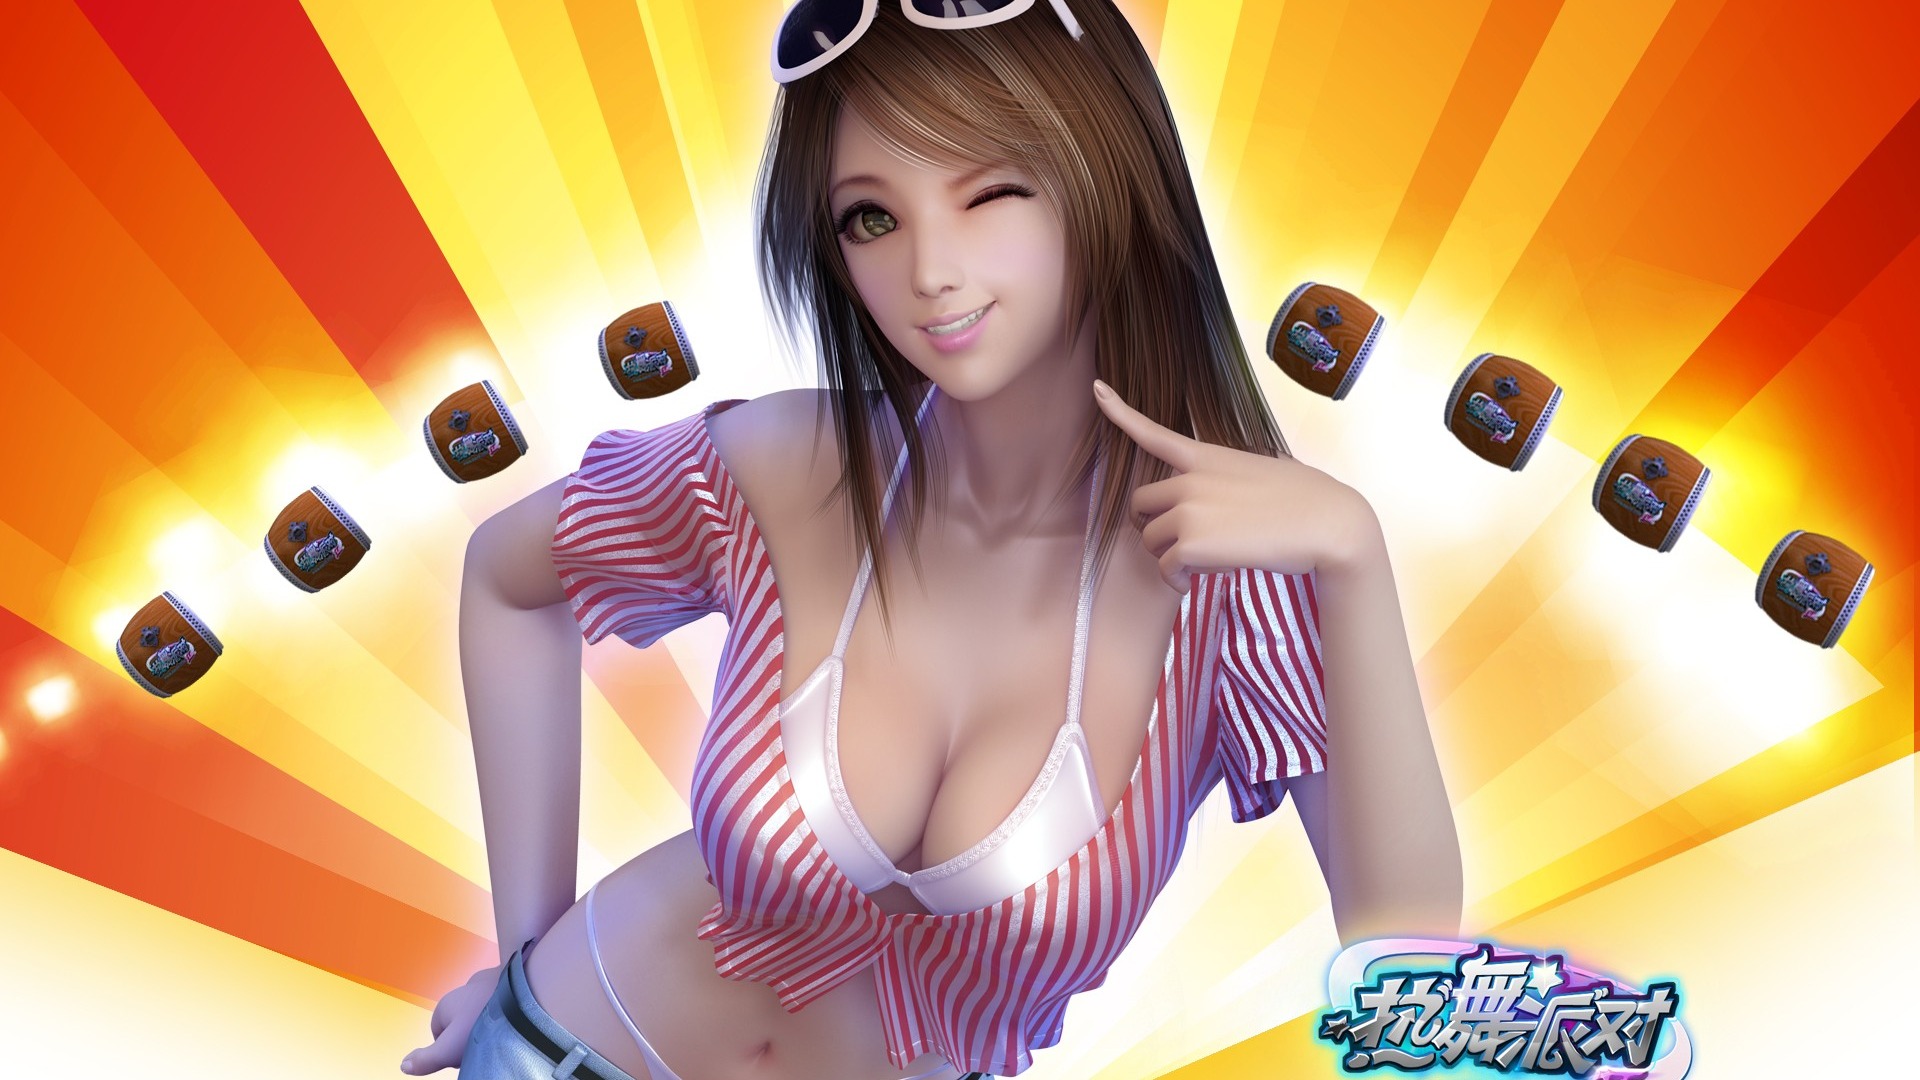 Online game Hot Dance Party II official wallpapers #19 - 1920x1080